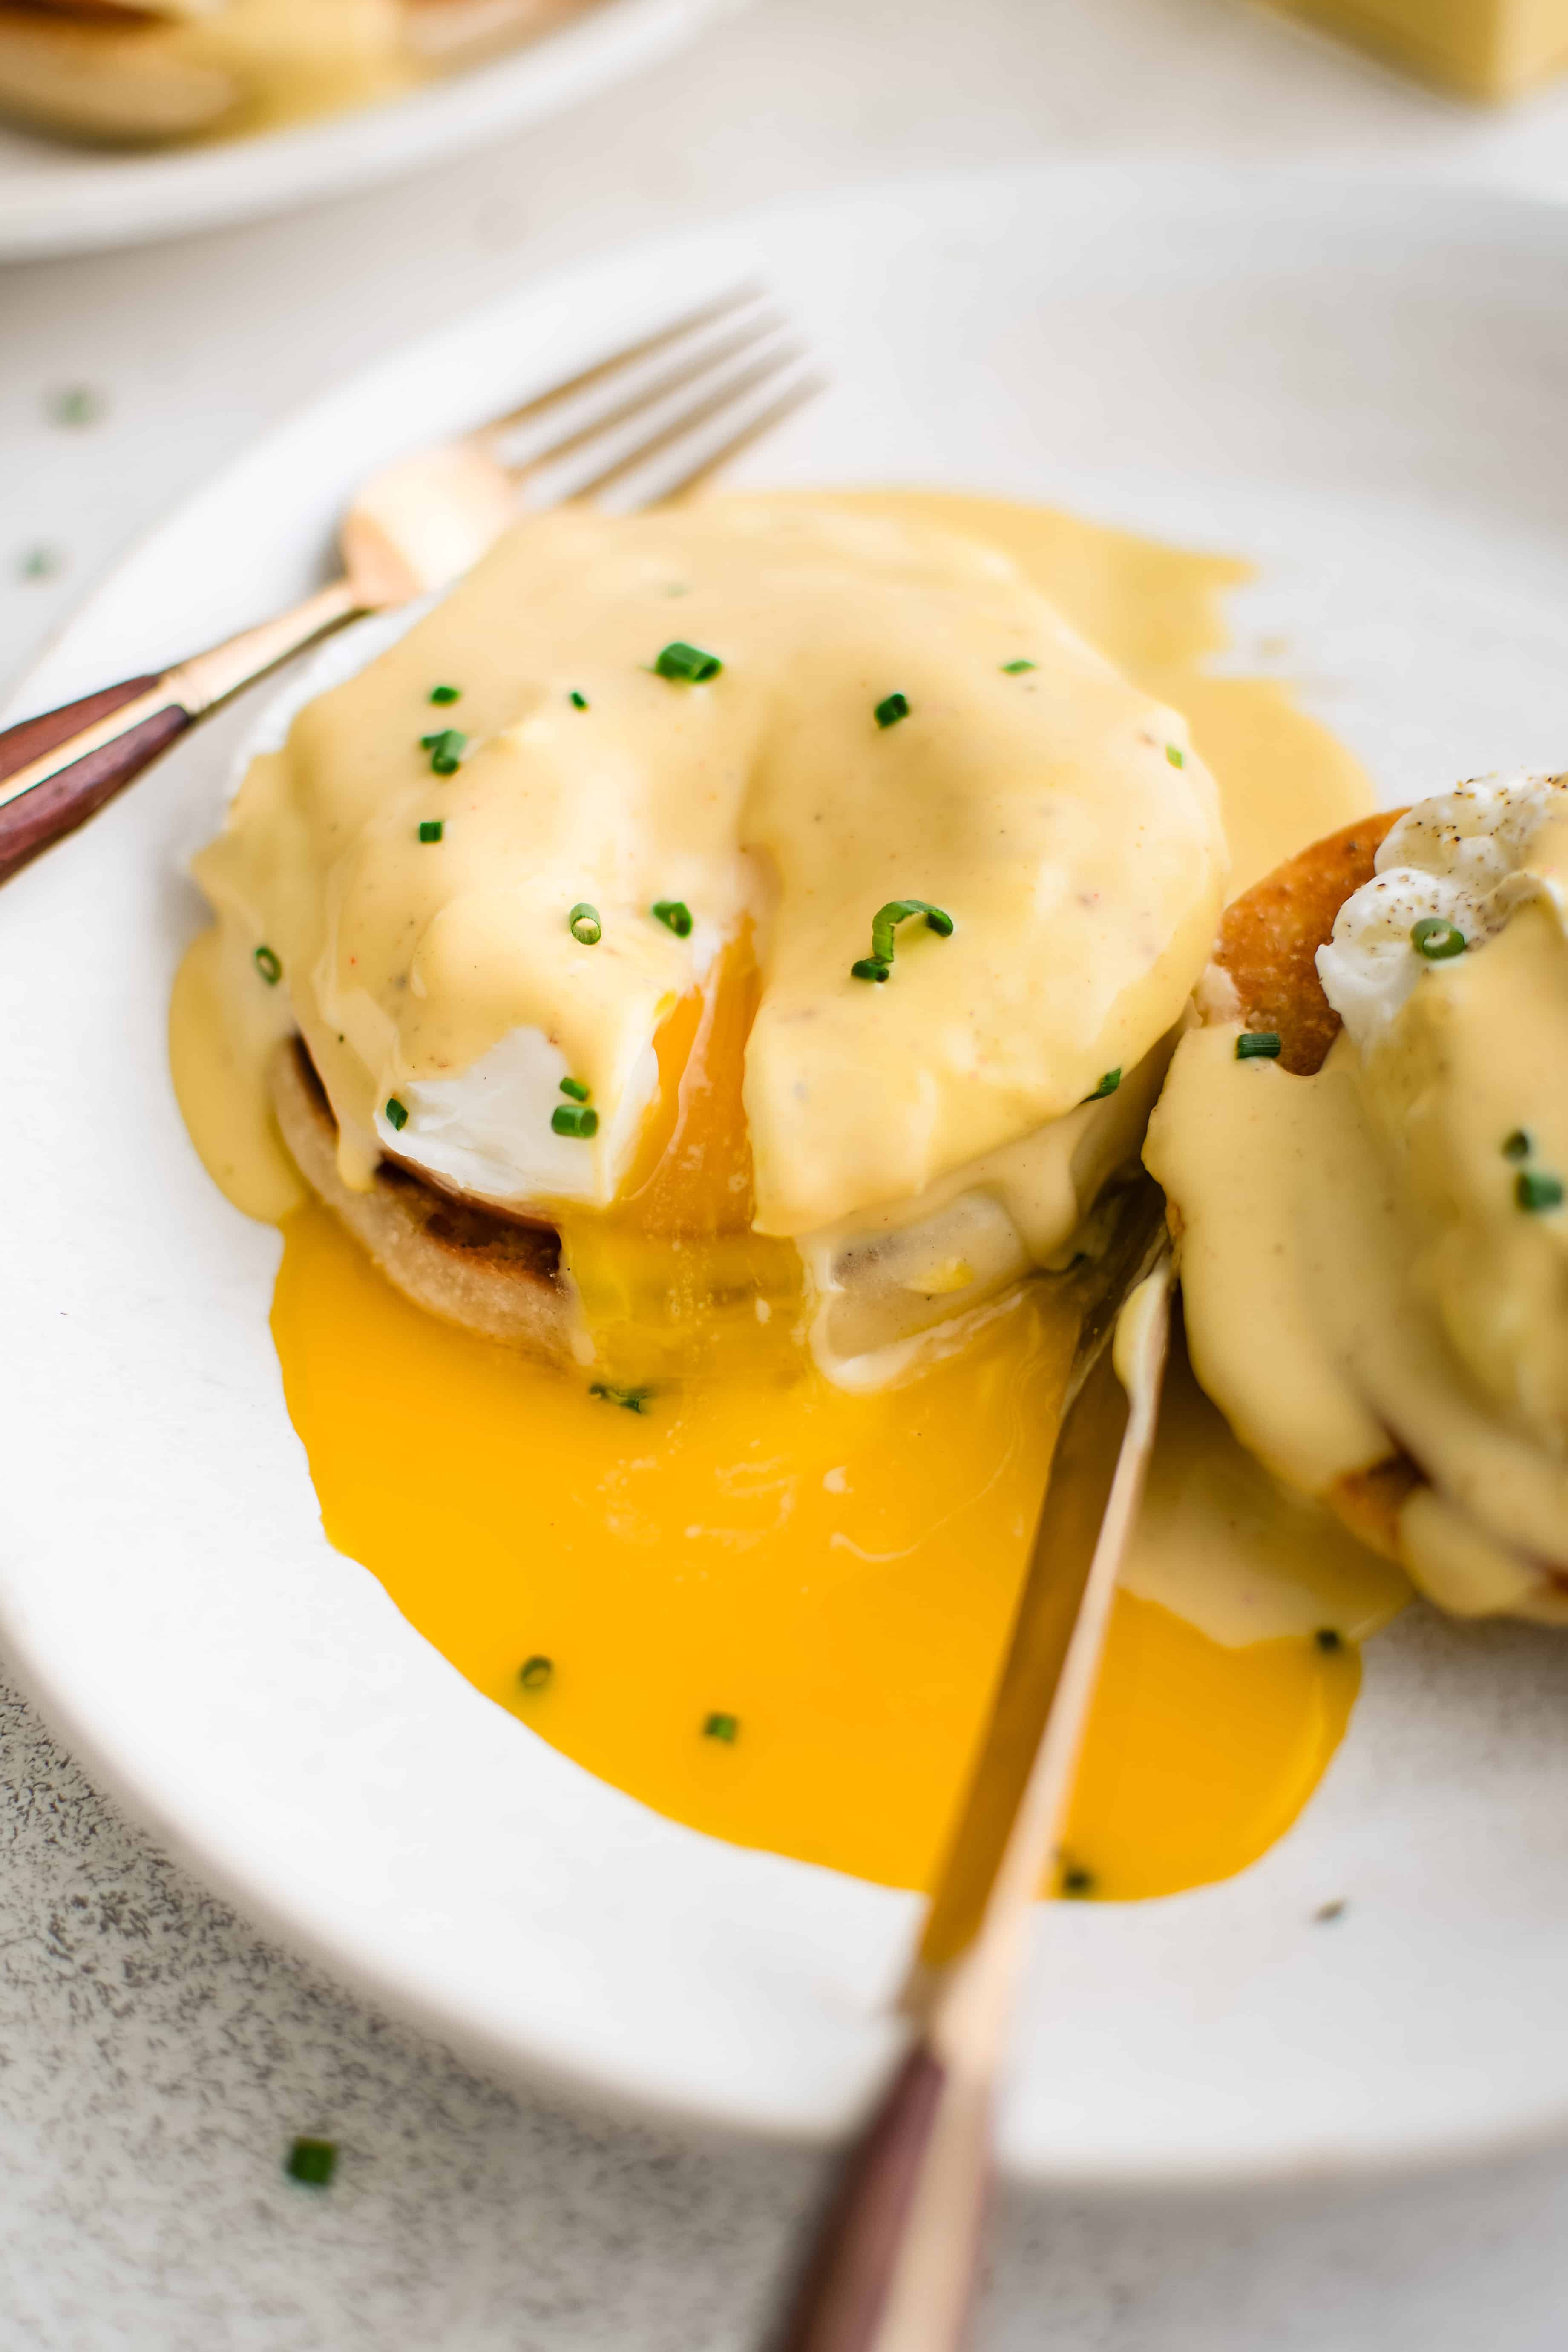 Eggs Benedict with split and drippy poached egg, Canadian bacon, and hollandaise sauce on an English muffin on a white plate.